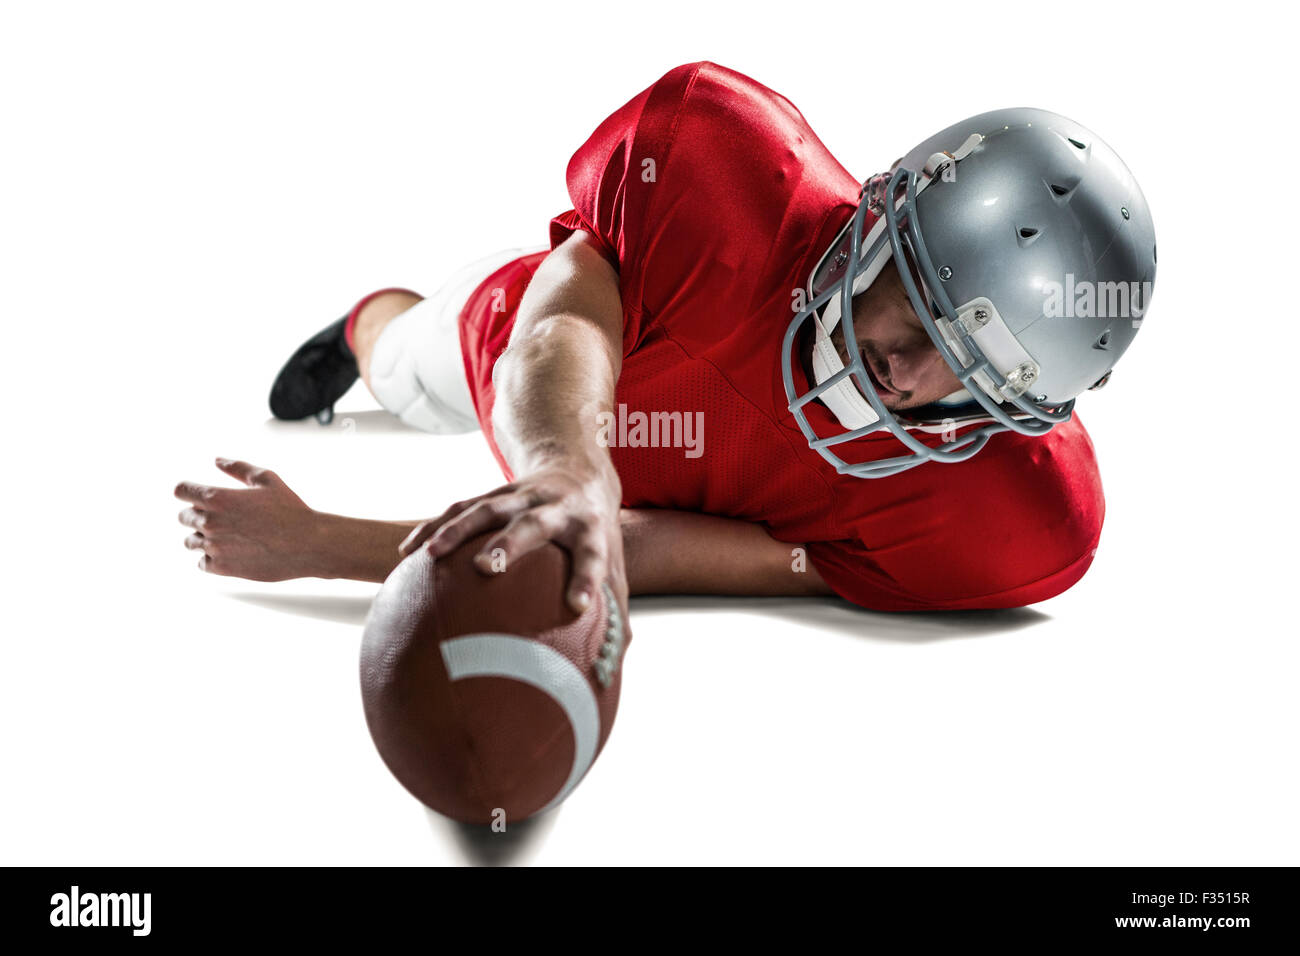 Sports player struggling to catch the ball Stock Photo